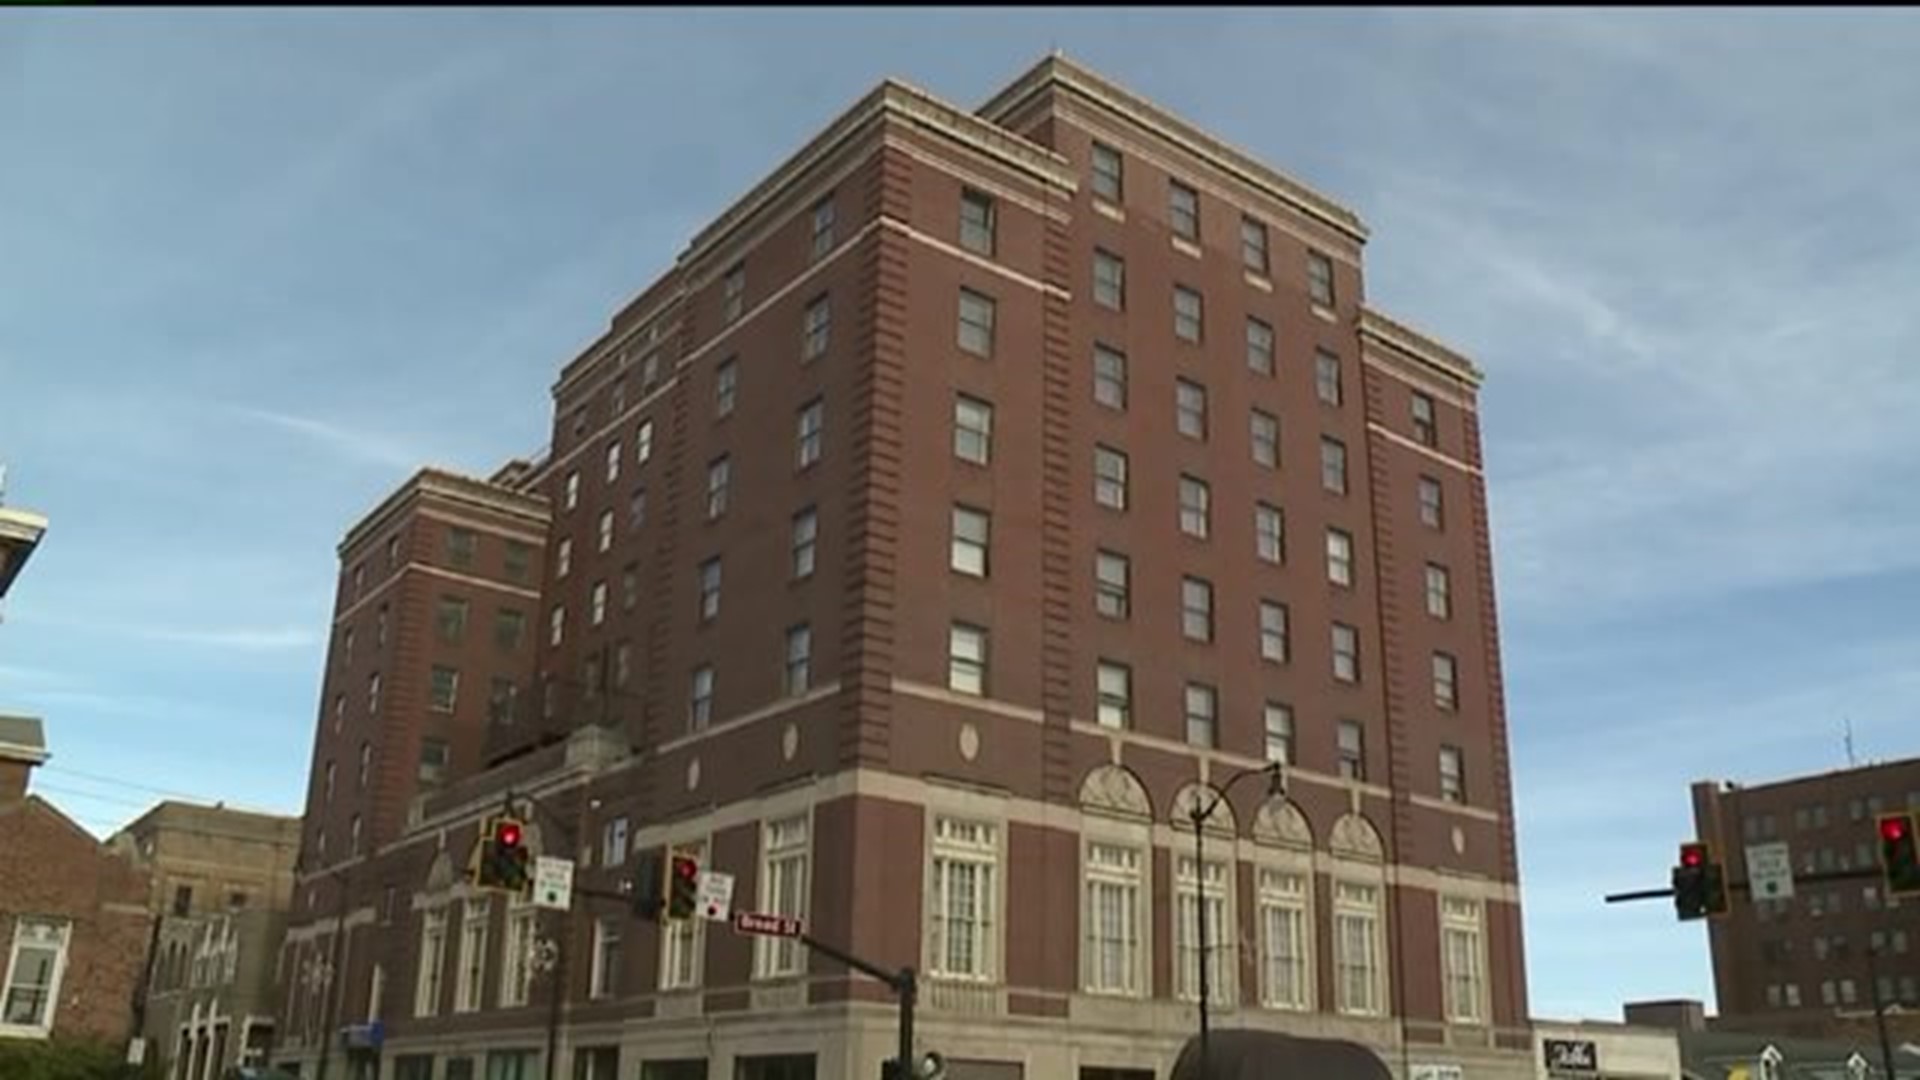 $2.5 Million in State Money to Go to Redevelop Old Hotel in Hazleton